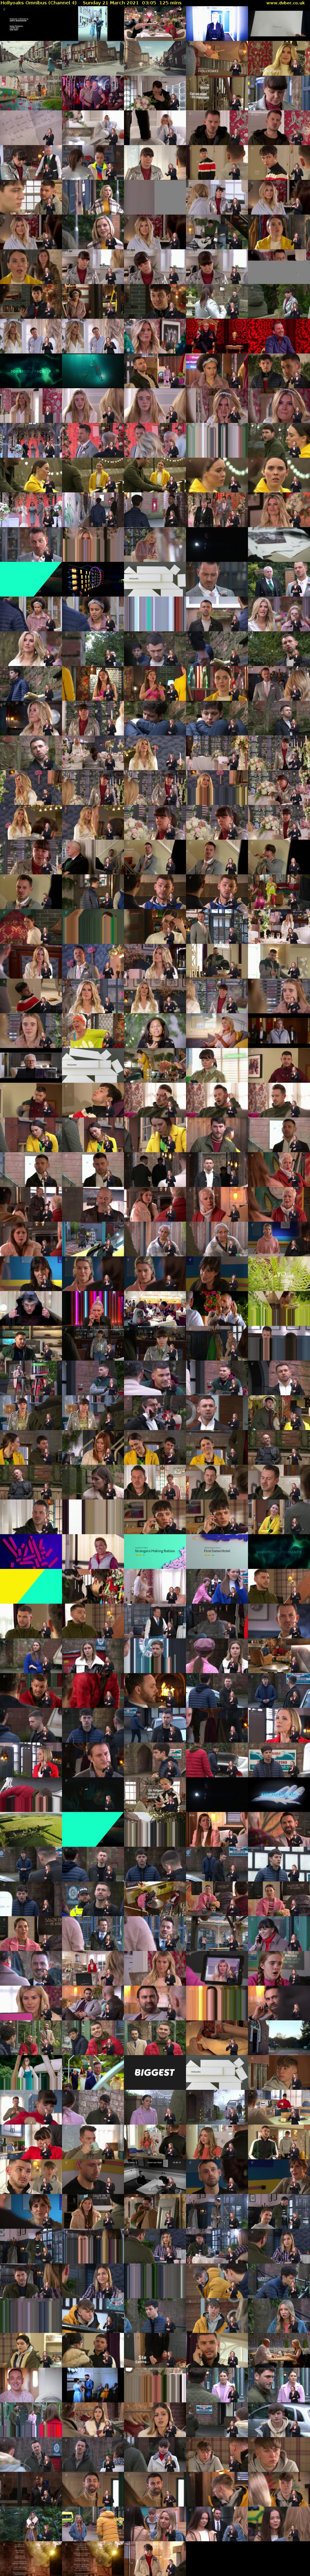 Hollyoaks Omnibus (Channel 4) Sunday 21 March 2021 03:05 - 05:10